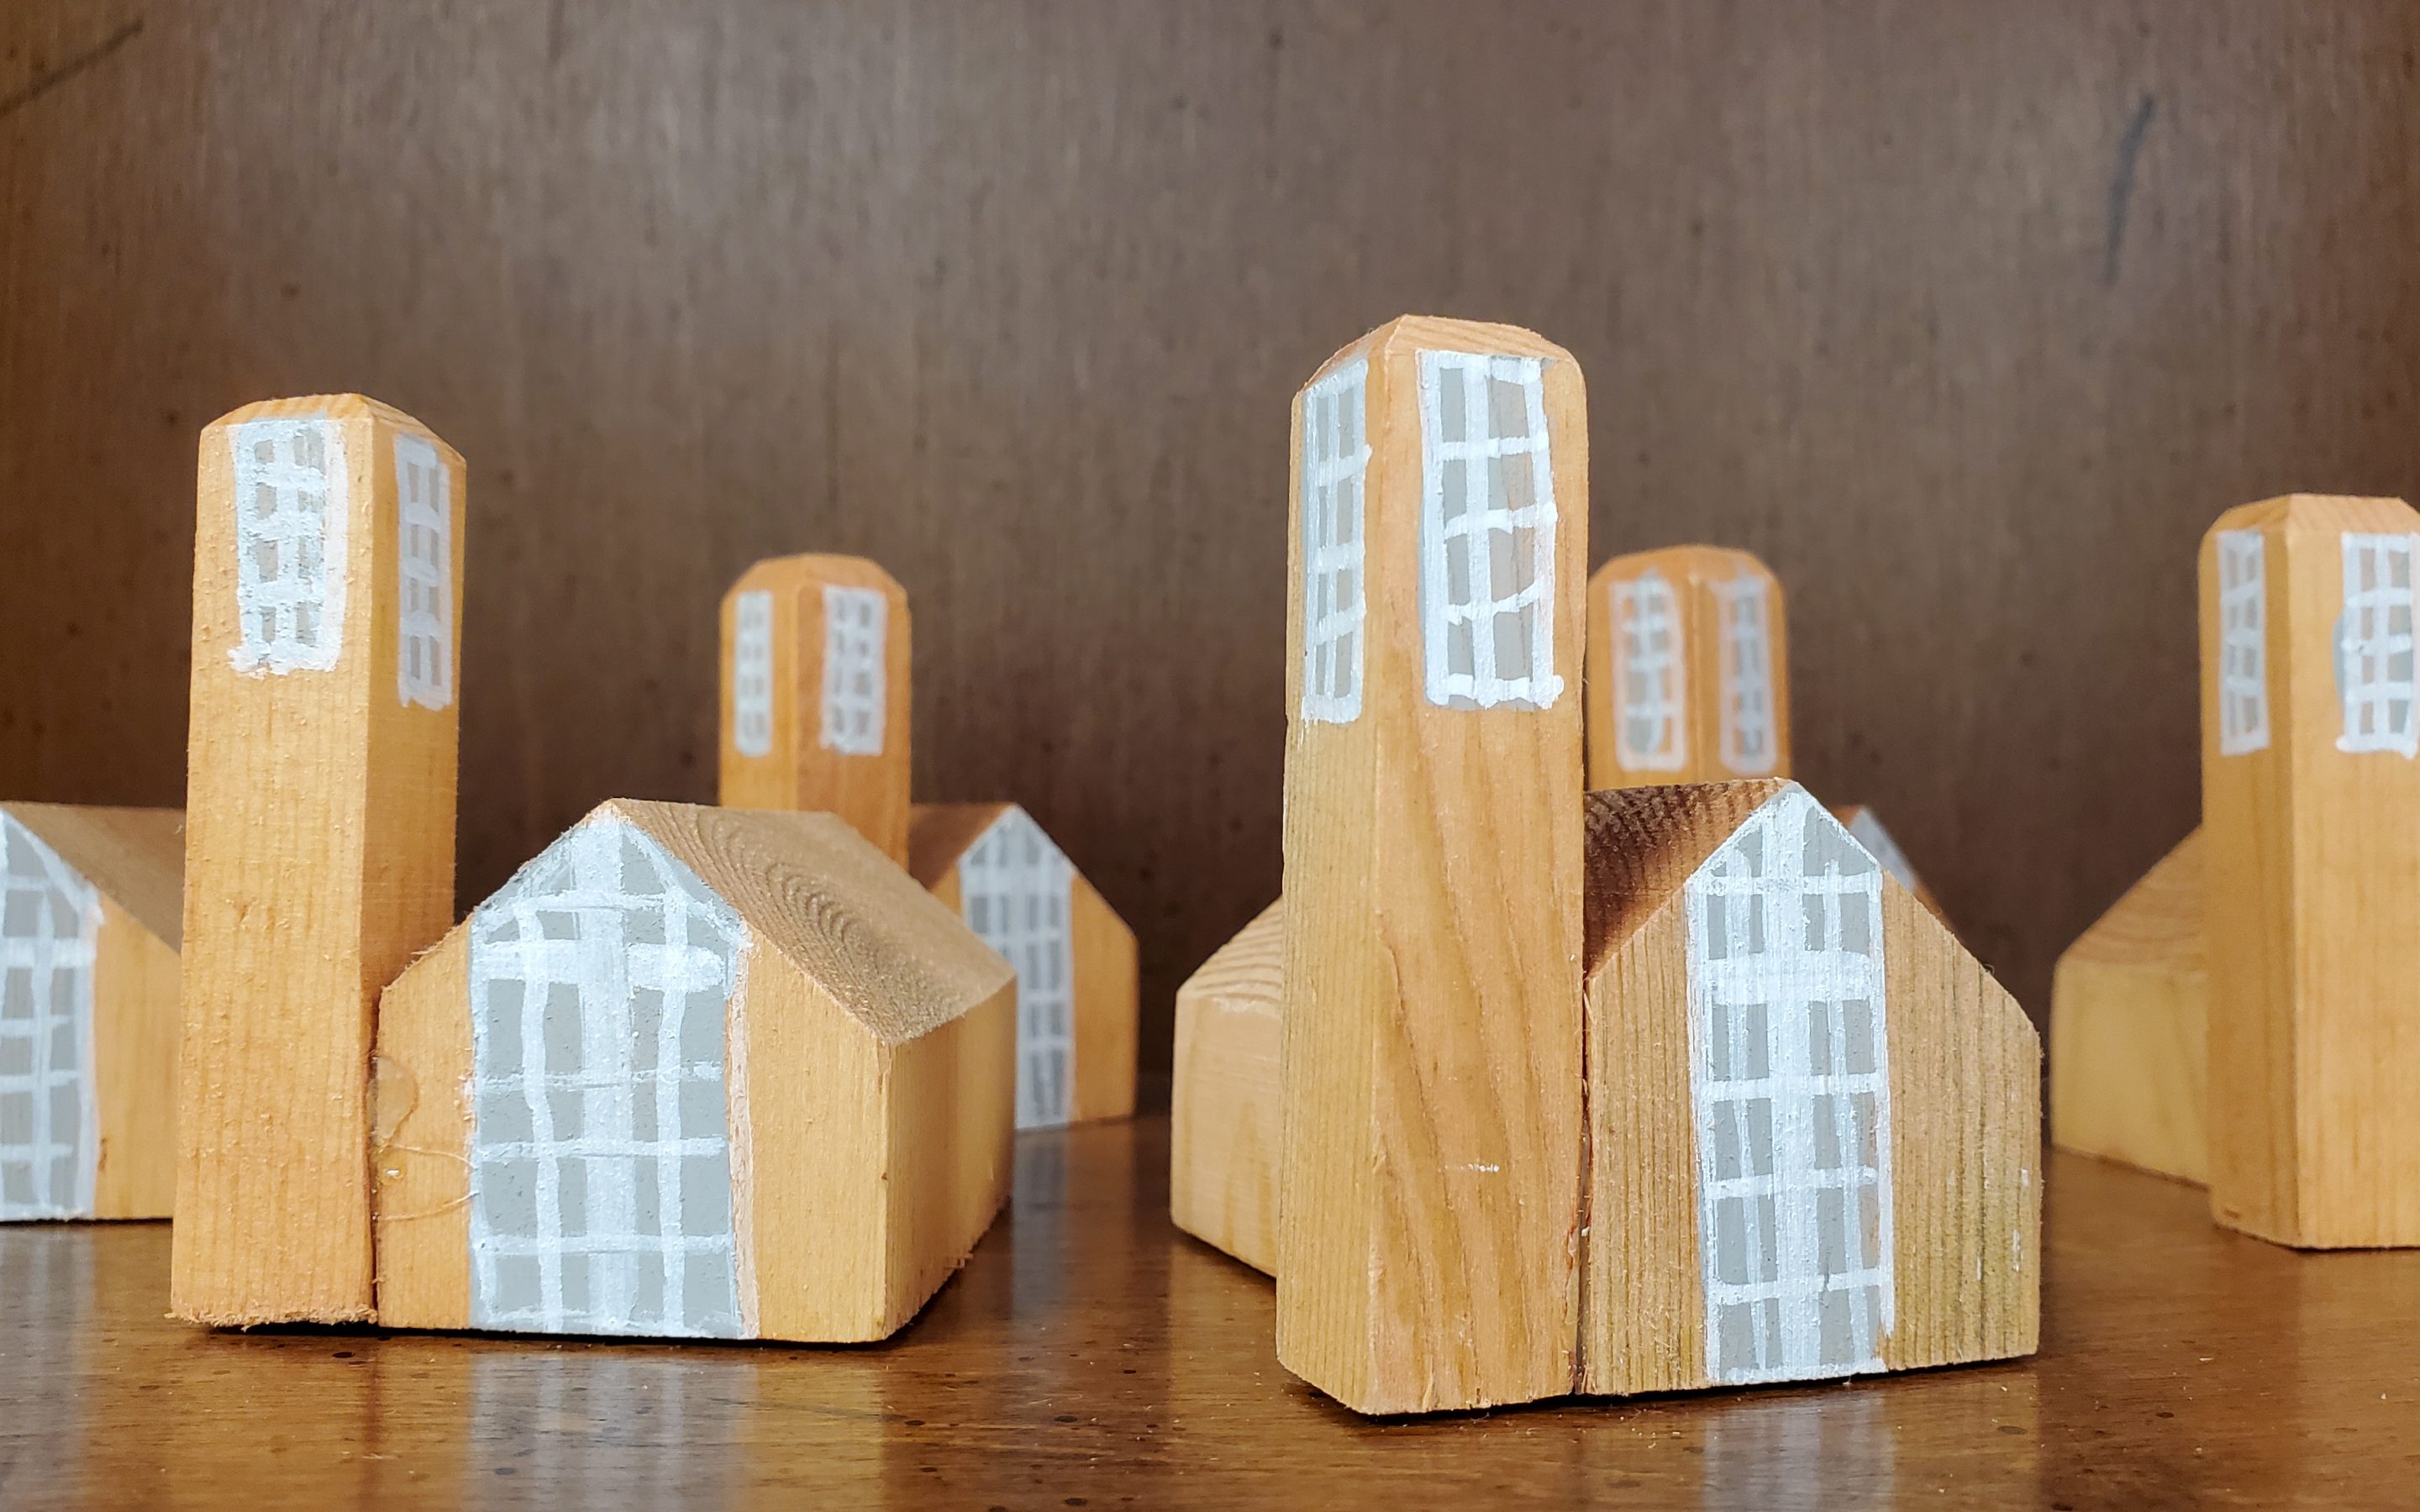 a close-up photo of several small, wooden blocks that have the shape and painted windows to look like Pittman Park Church